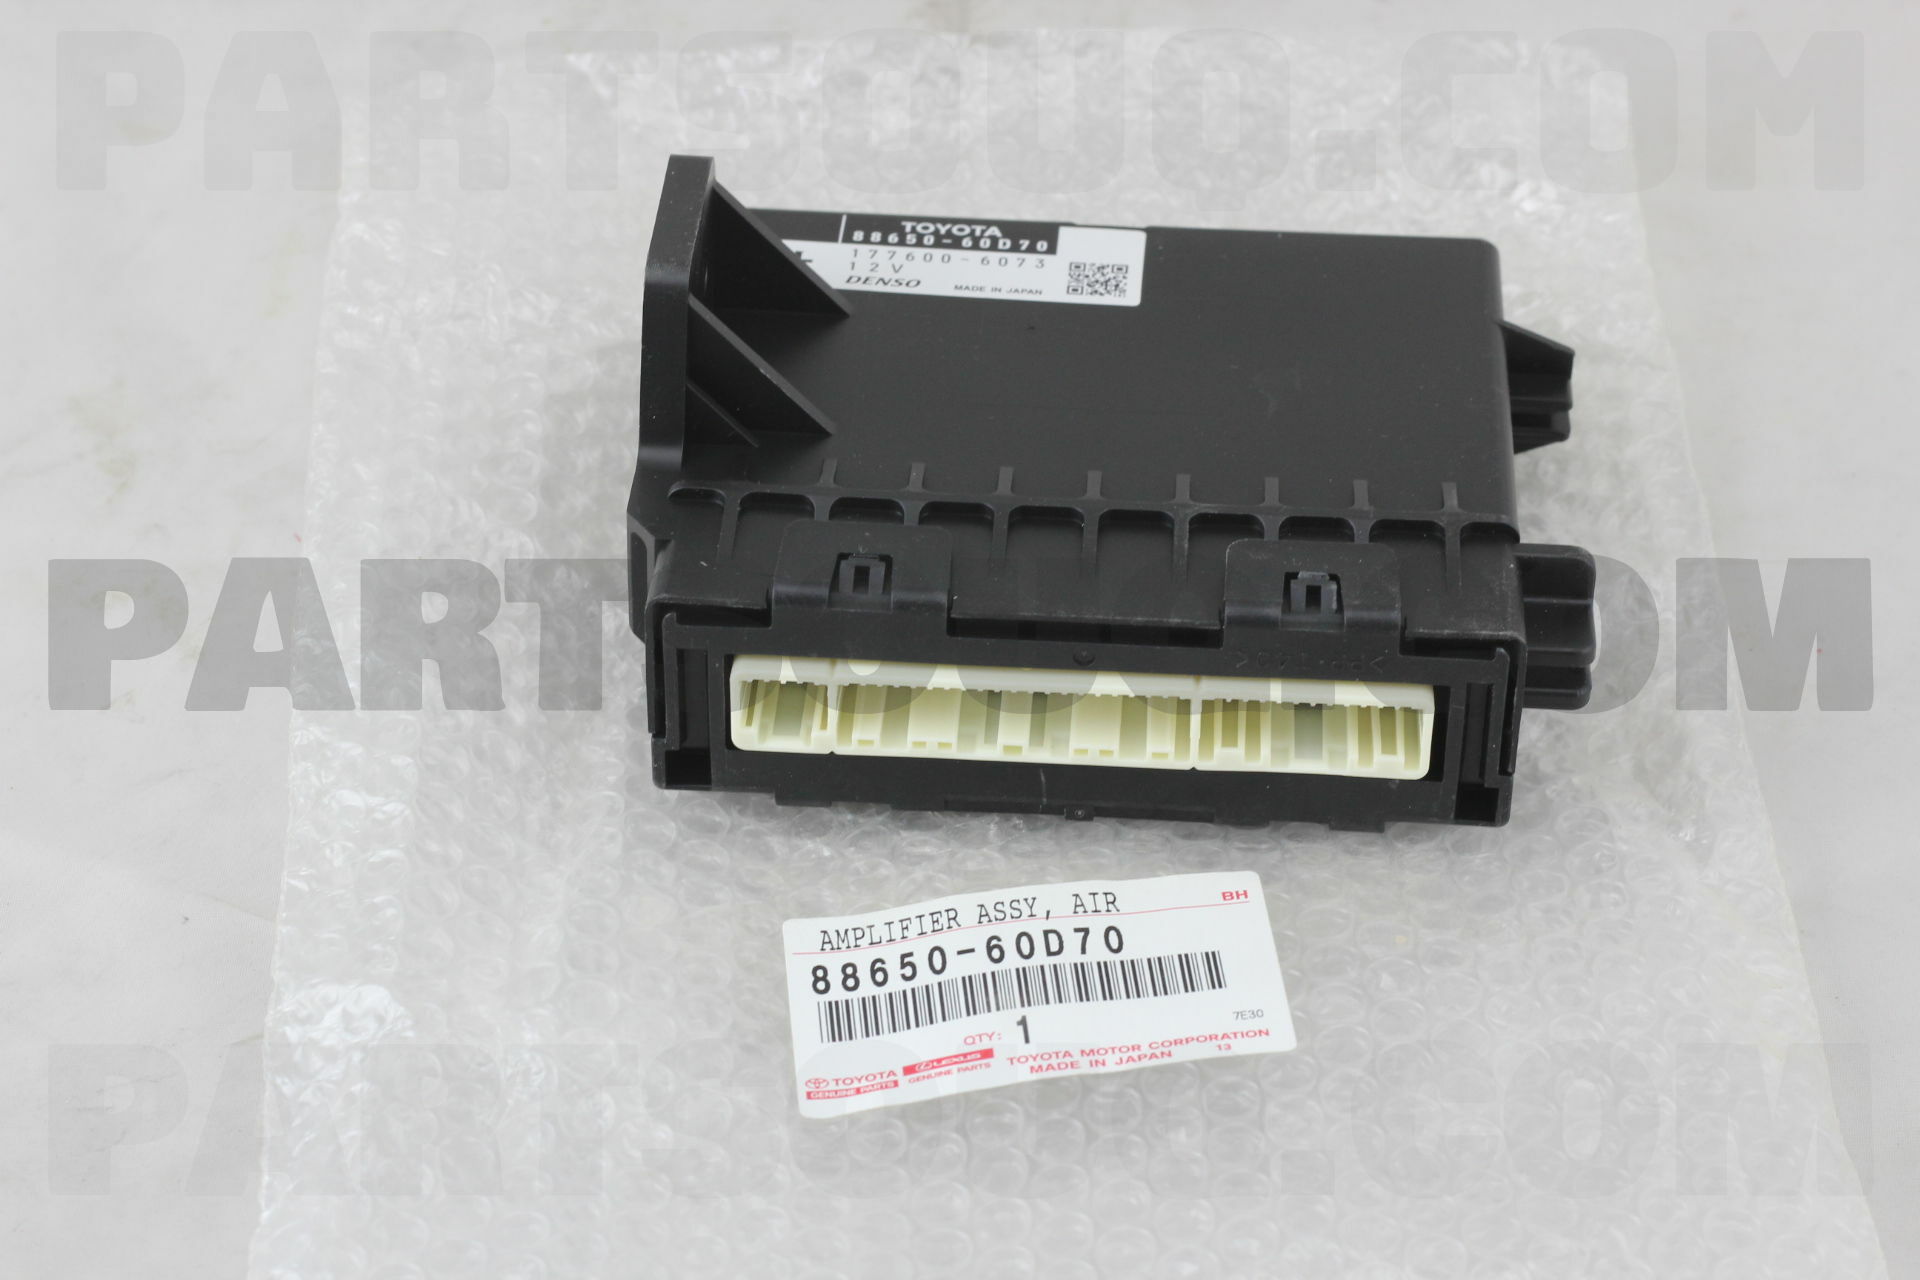 02 03 04 05 06 Toyota Camry 88650-06100 AC Conditioning Amplifier Module C-23-1